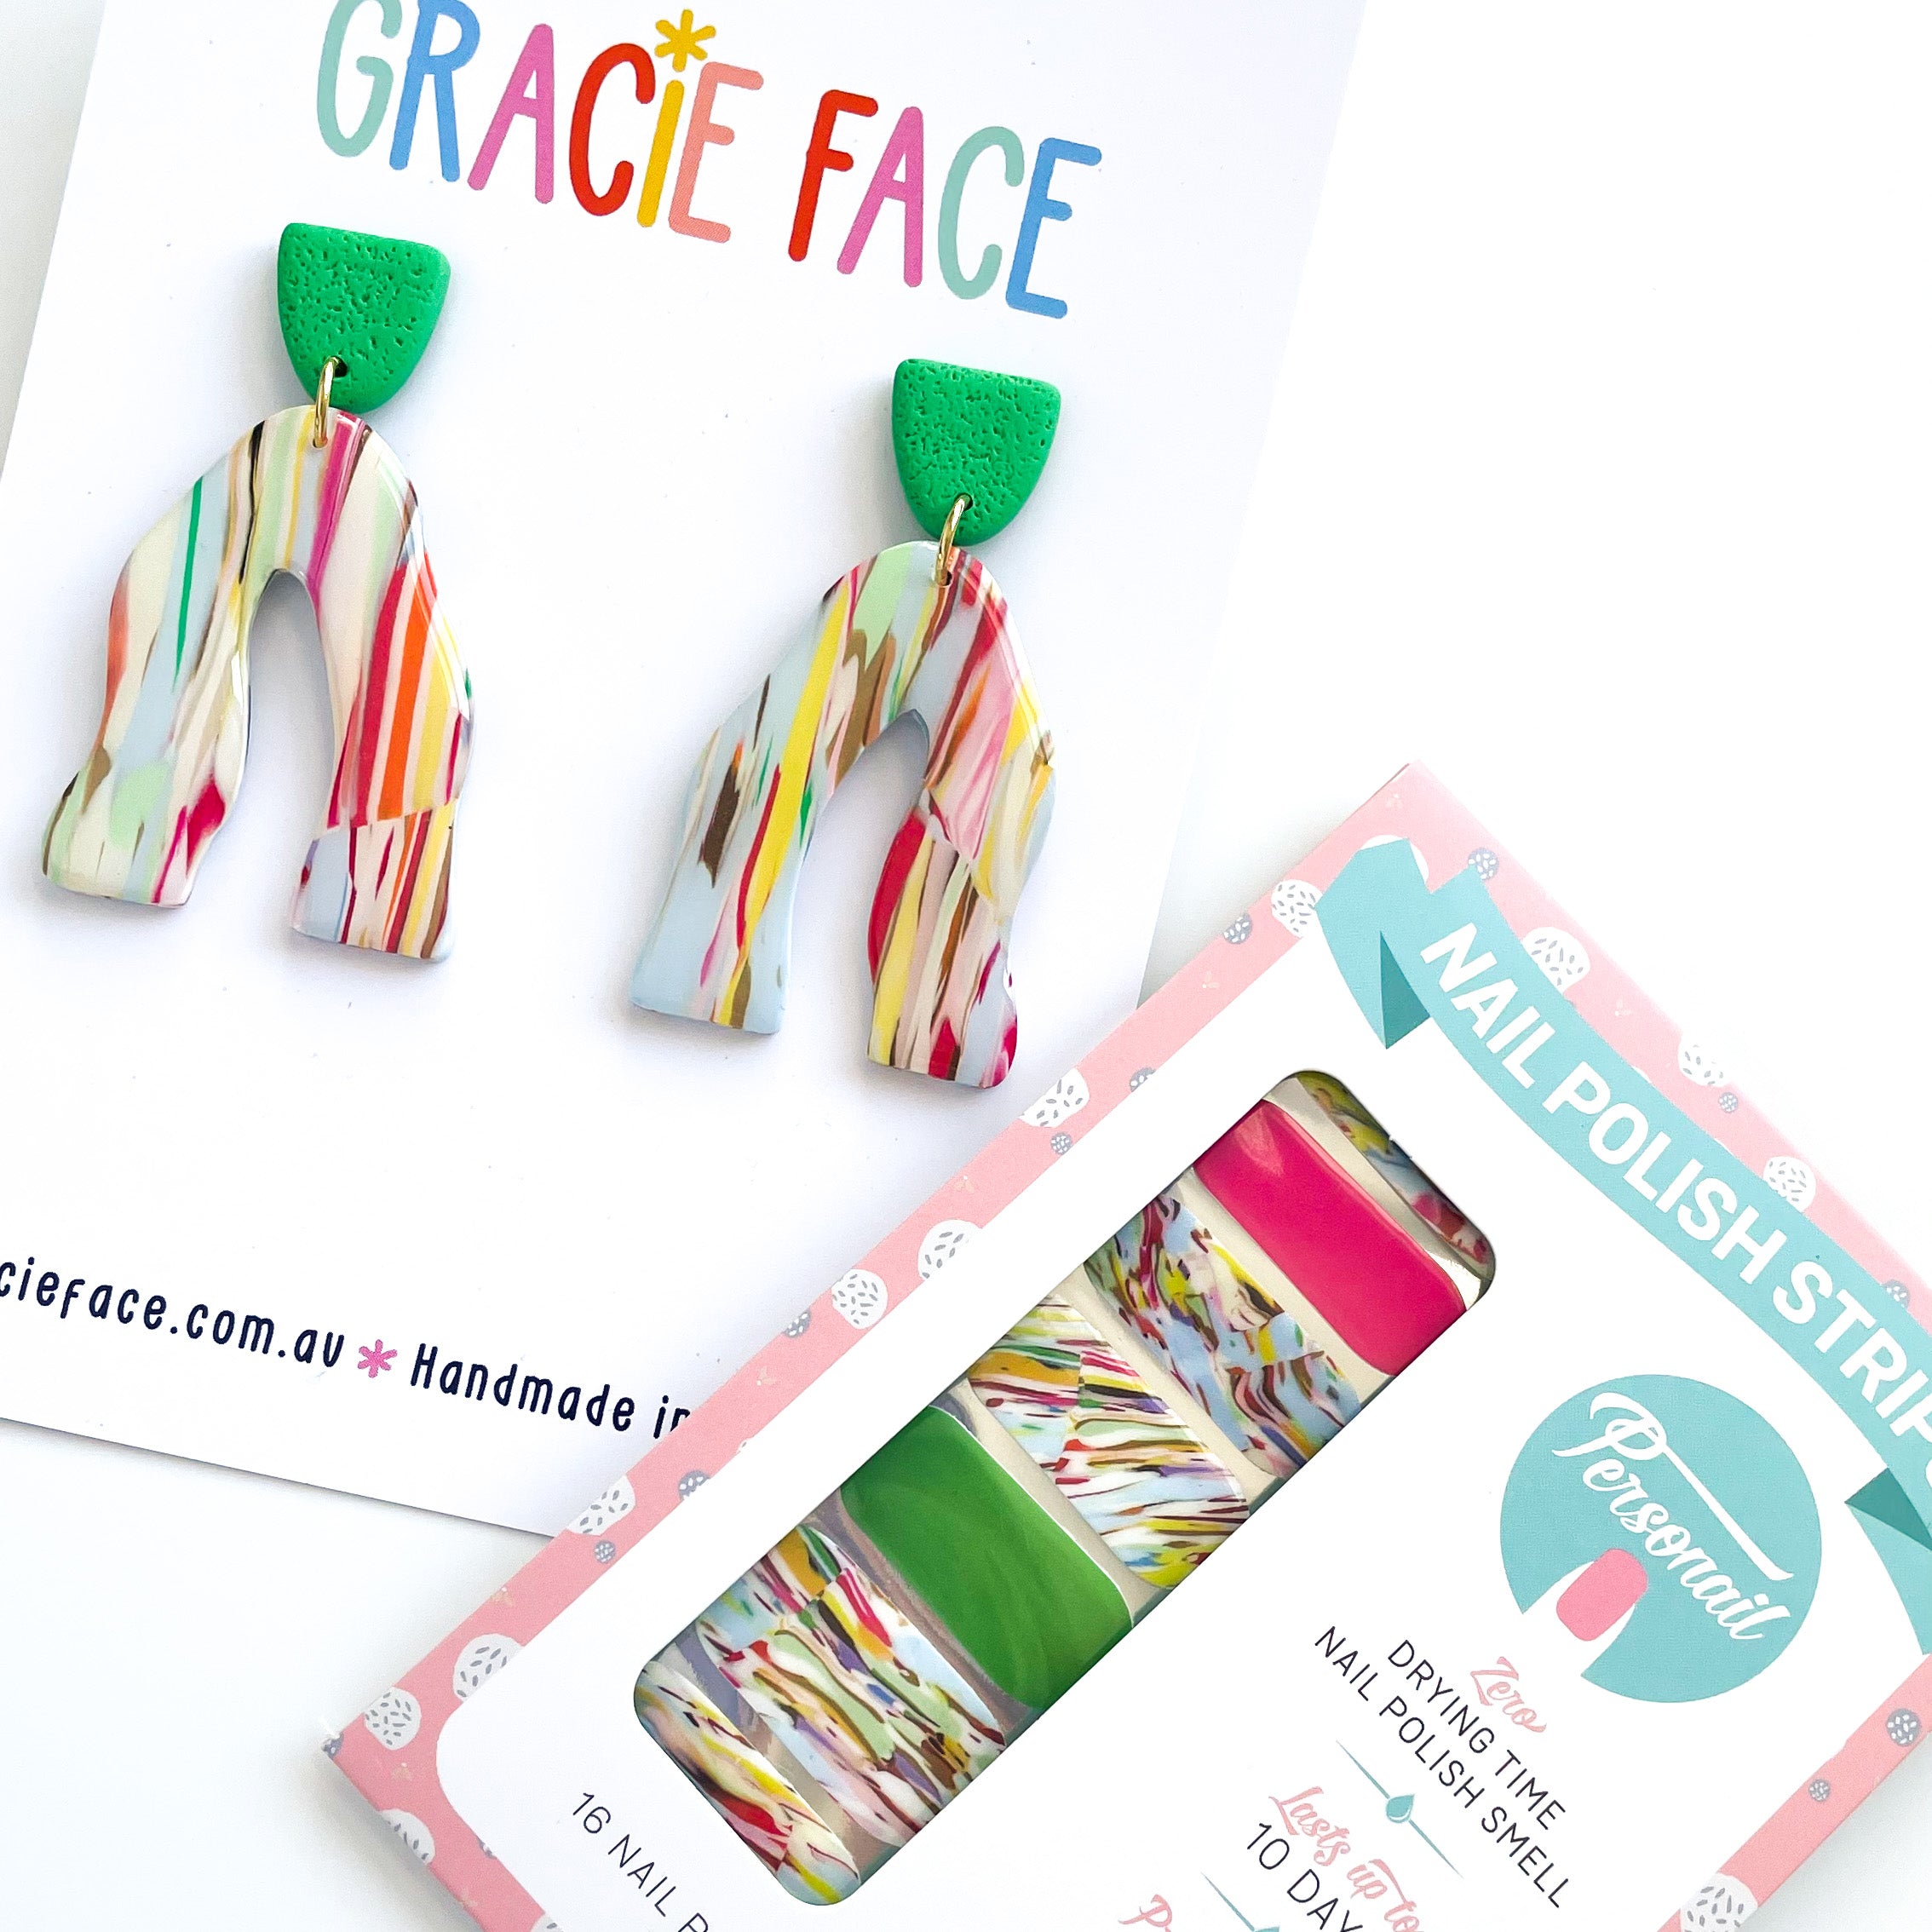 [COLLAB] Gracie Face (NO PACKAGING) Nail Wraps by Gracie Face